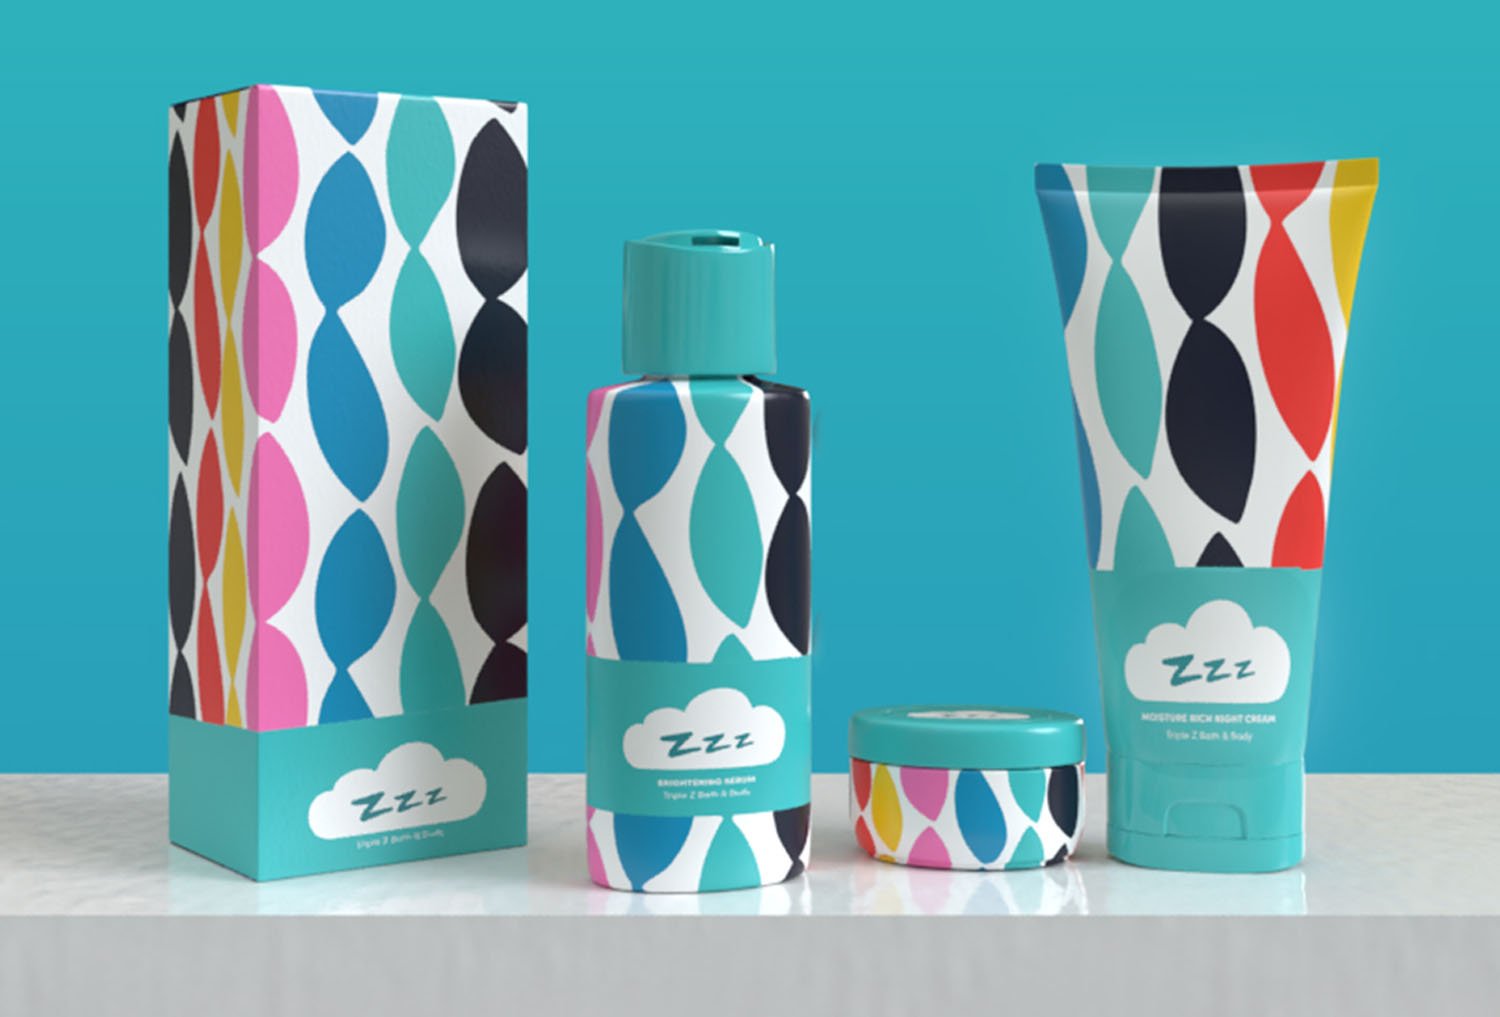 Mockup of packaging for a beauty brand designed by Chris Olson.